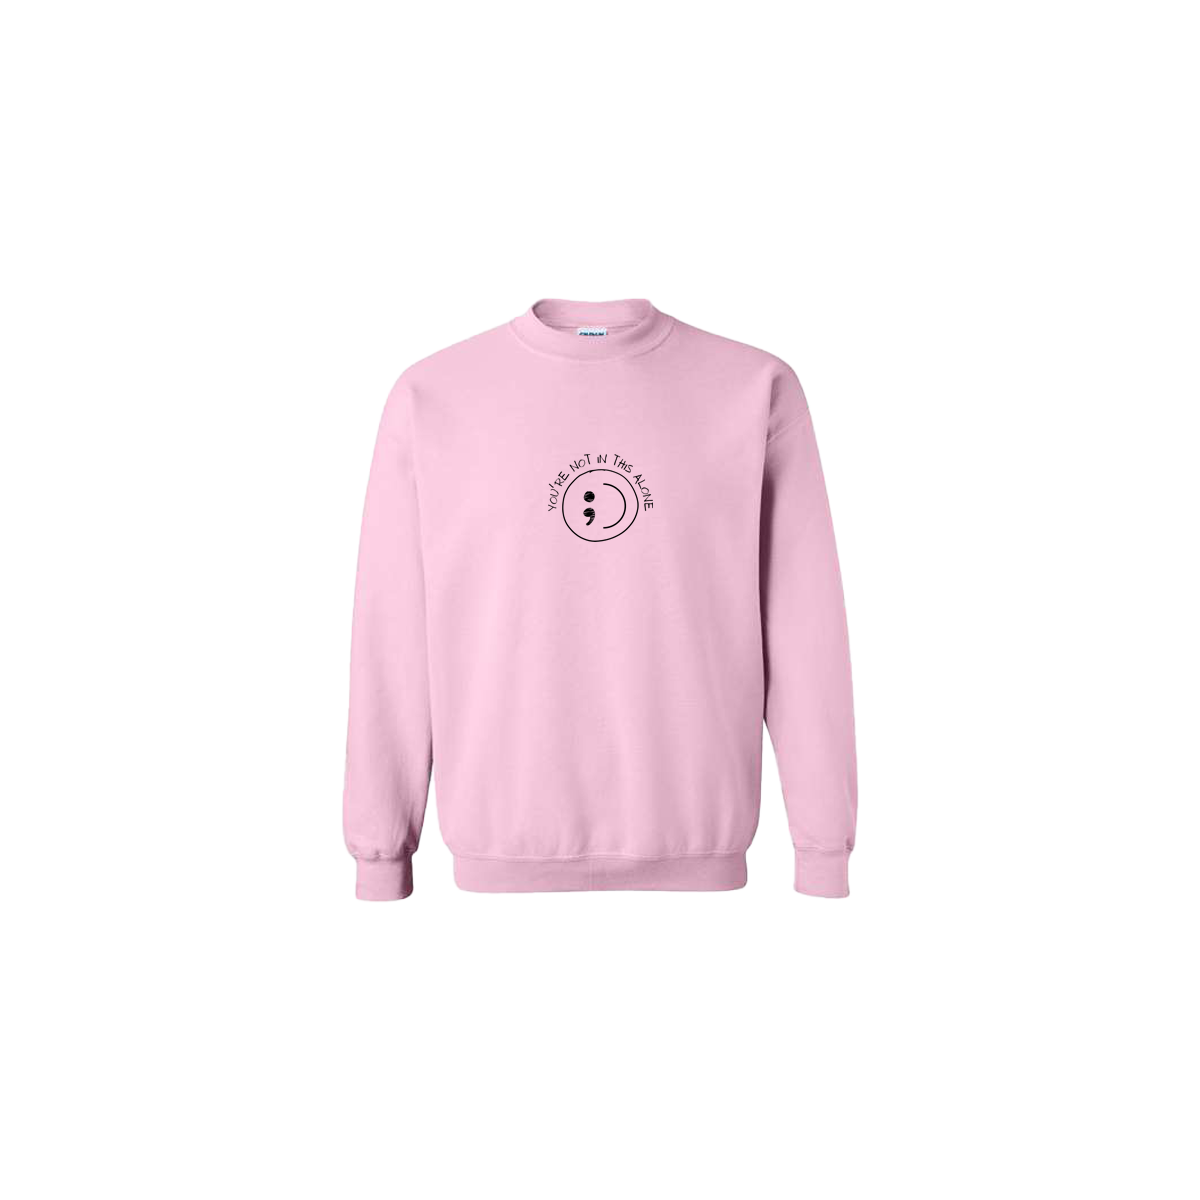 You're Not In This Alone Embroidered Light Pink Crewneck - Mental Health Awareness Clothing